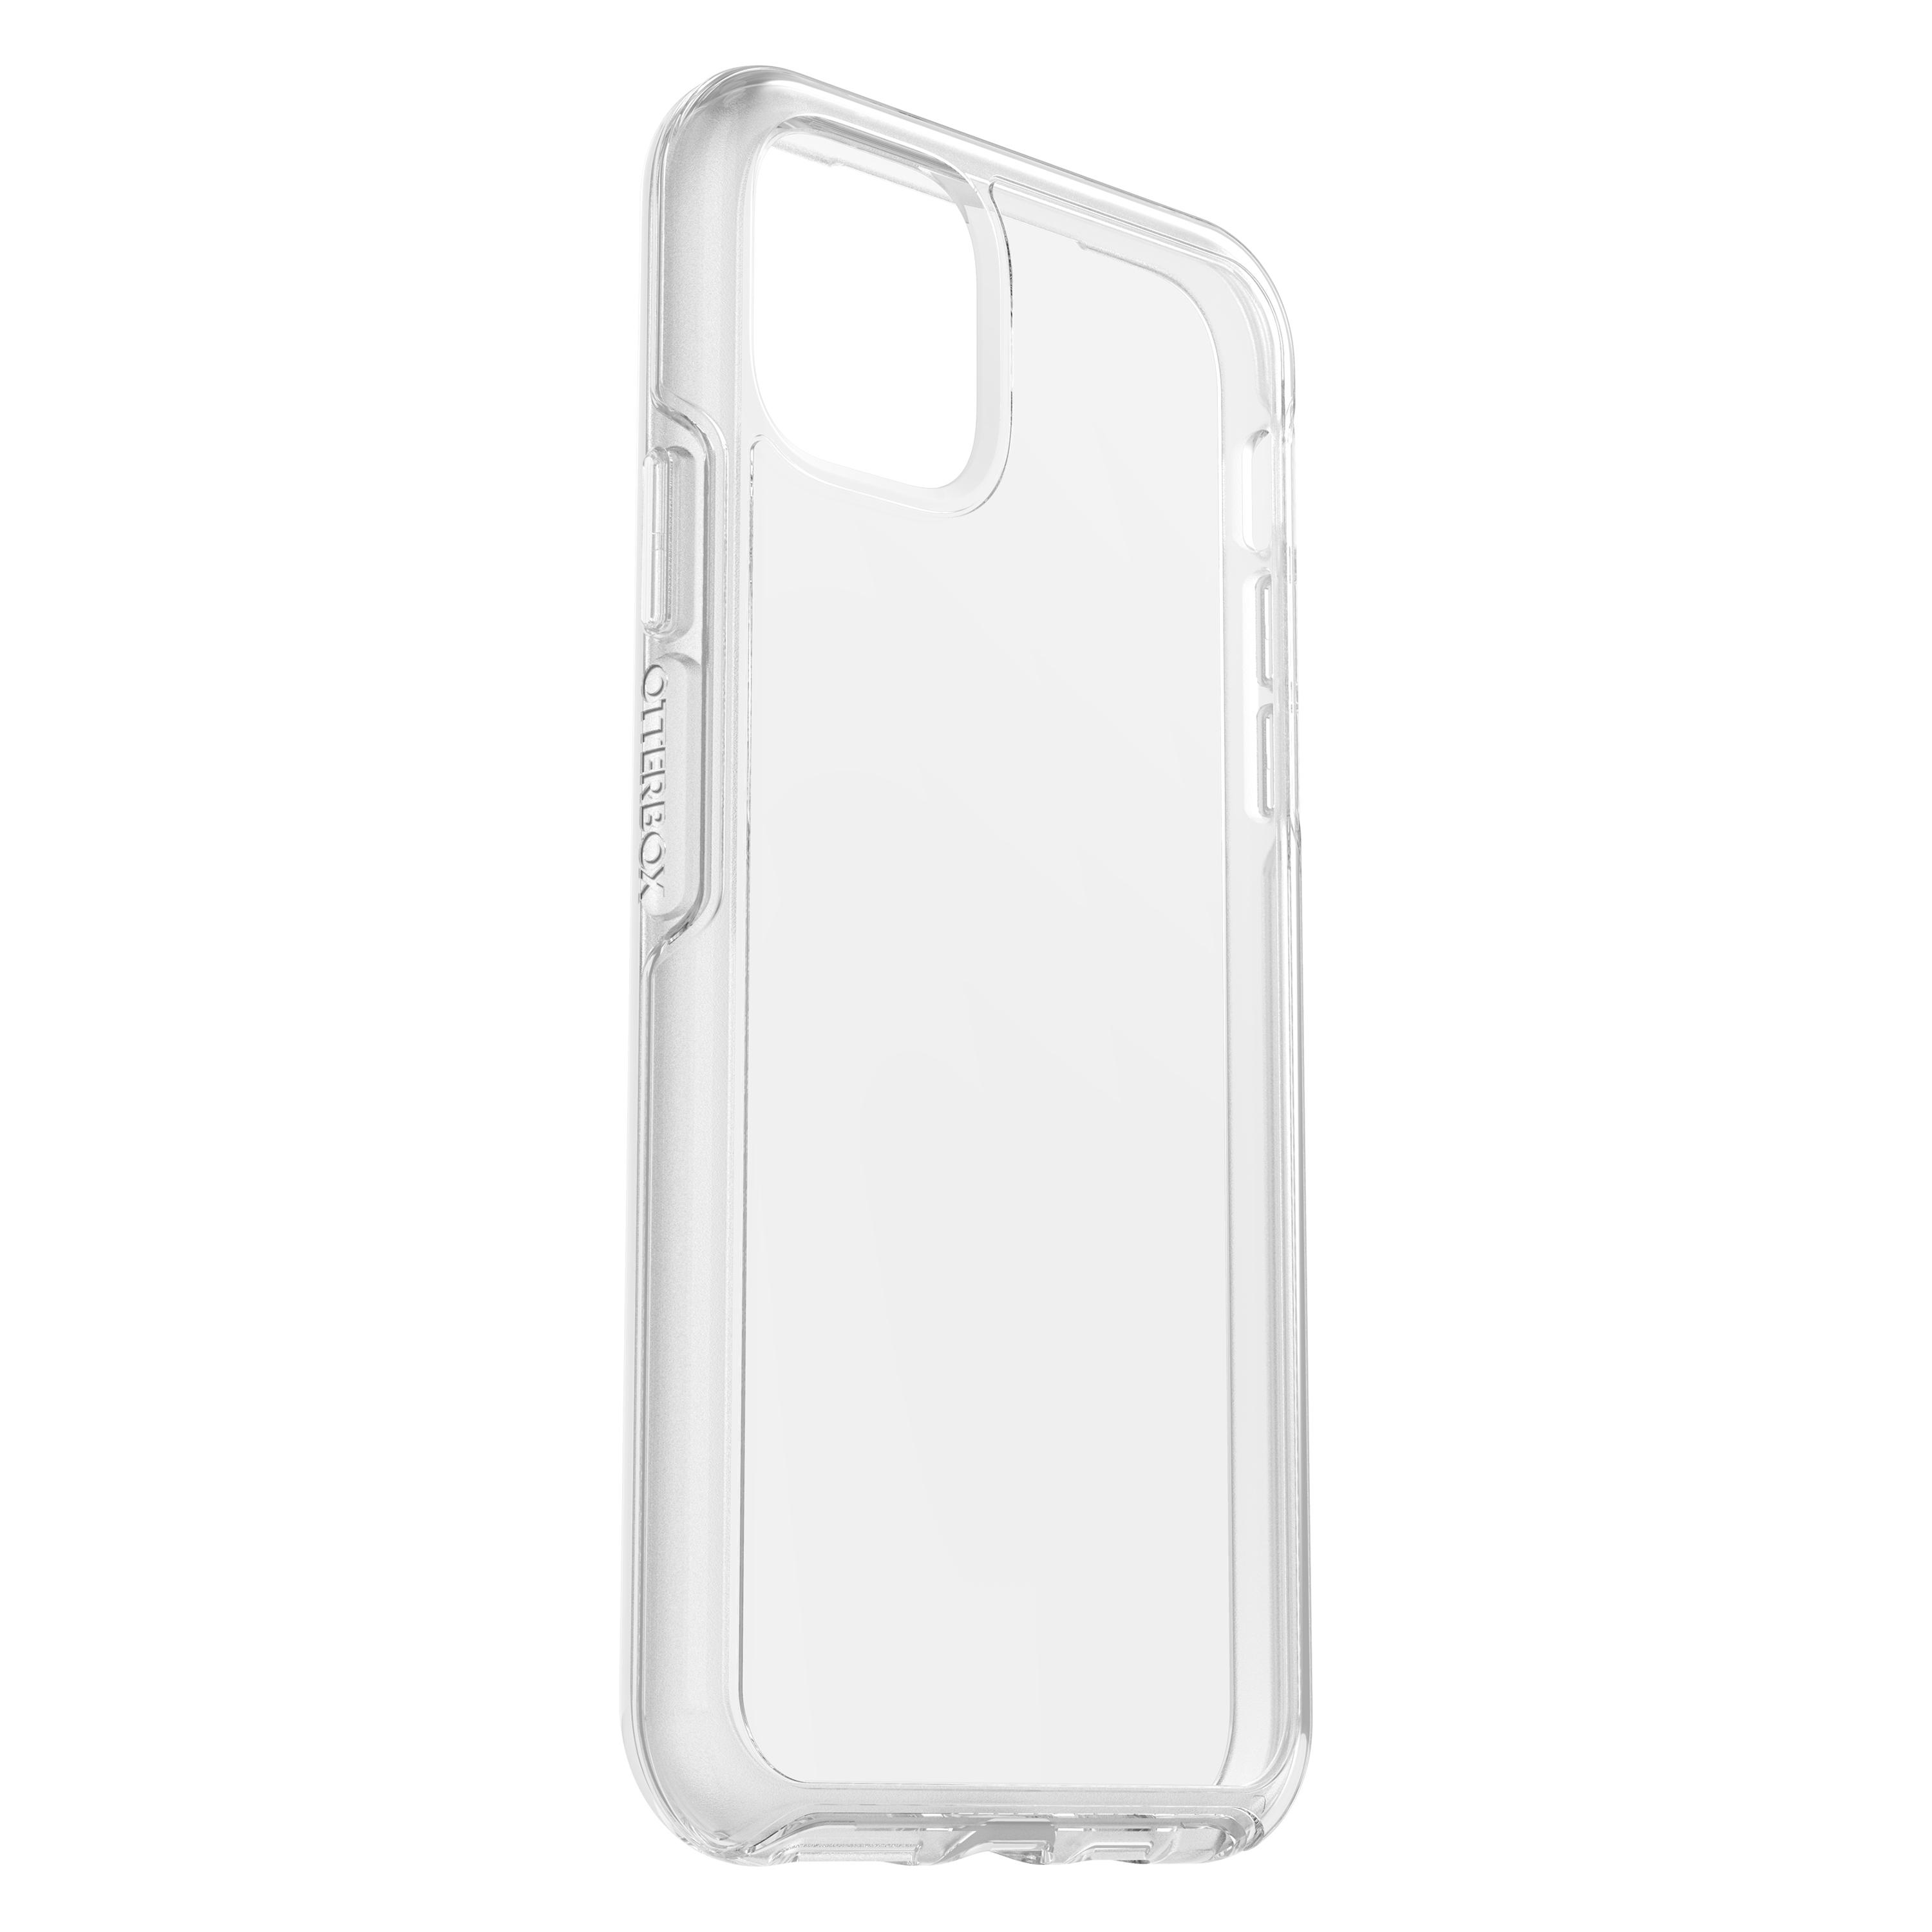 OTTERBOX Symmetry Max, Pro Apple, iPhone Clear, Transparent 11 Backcover